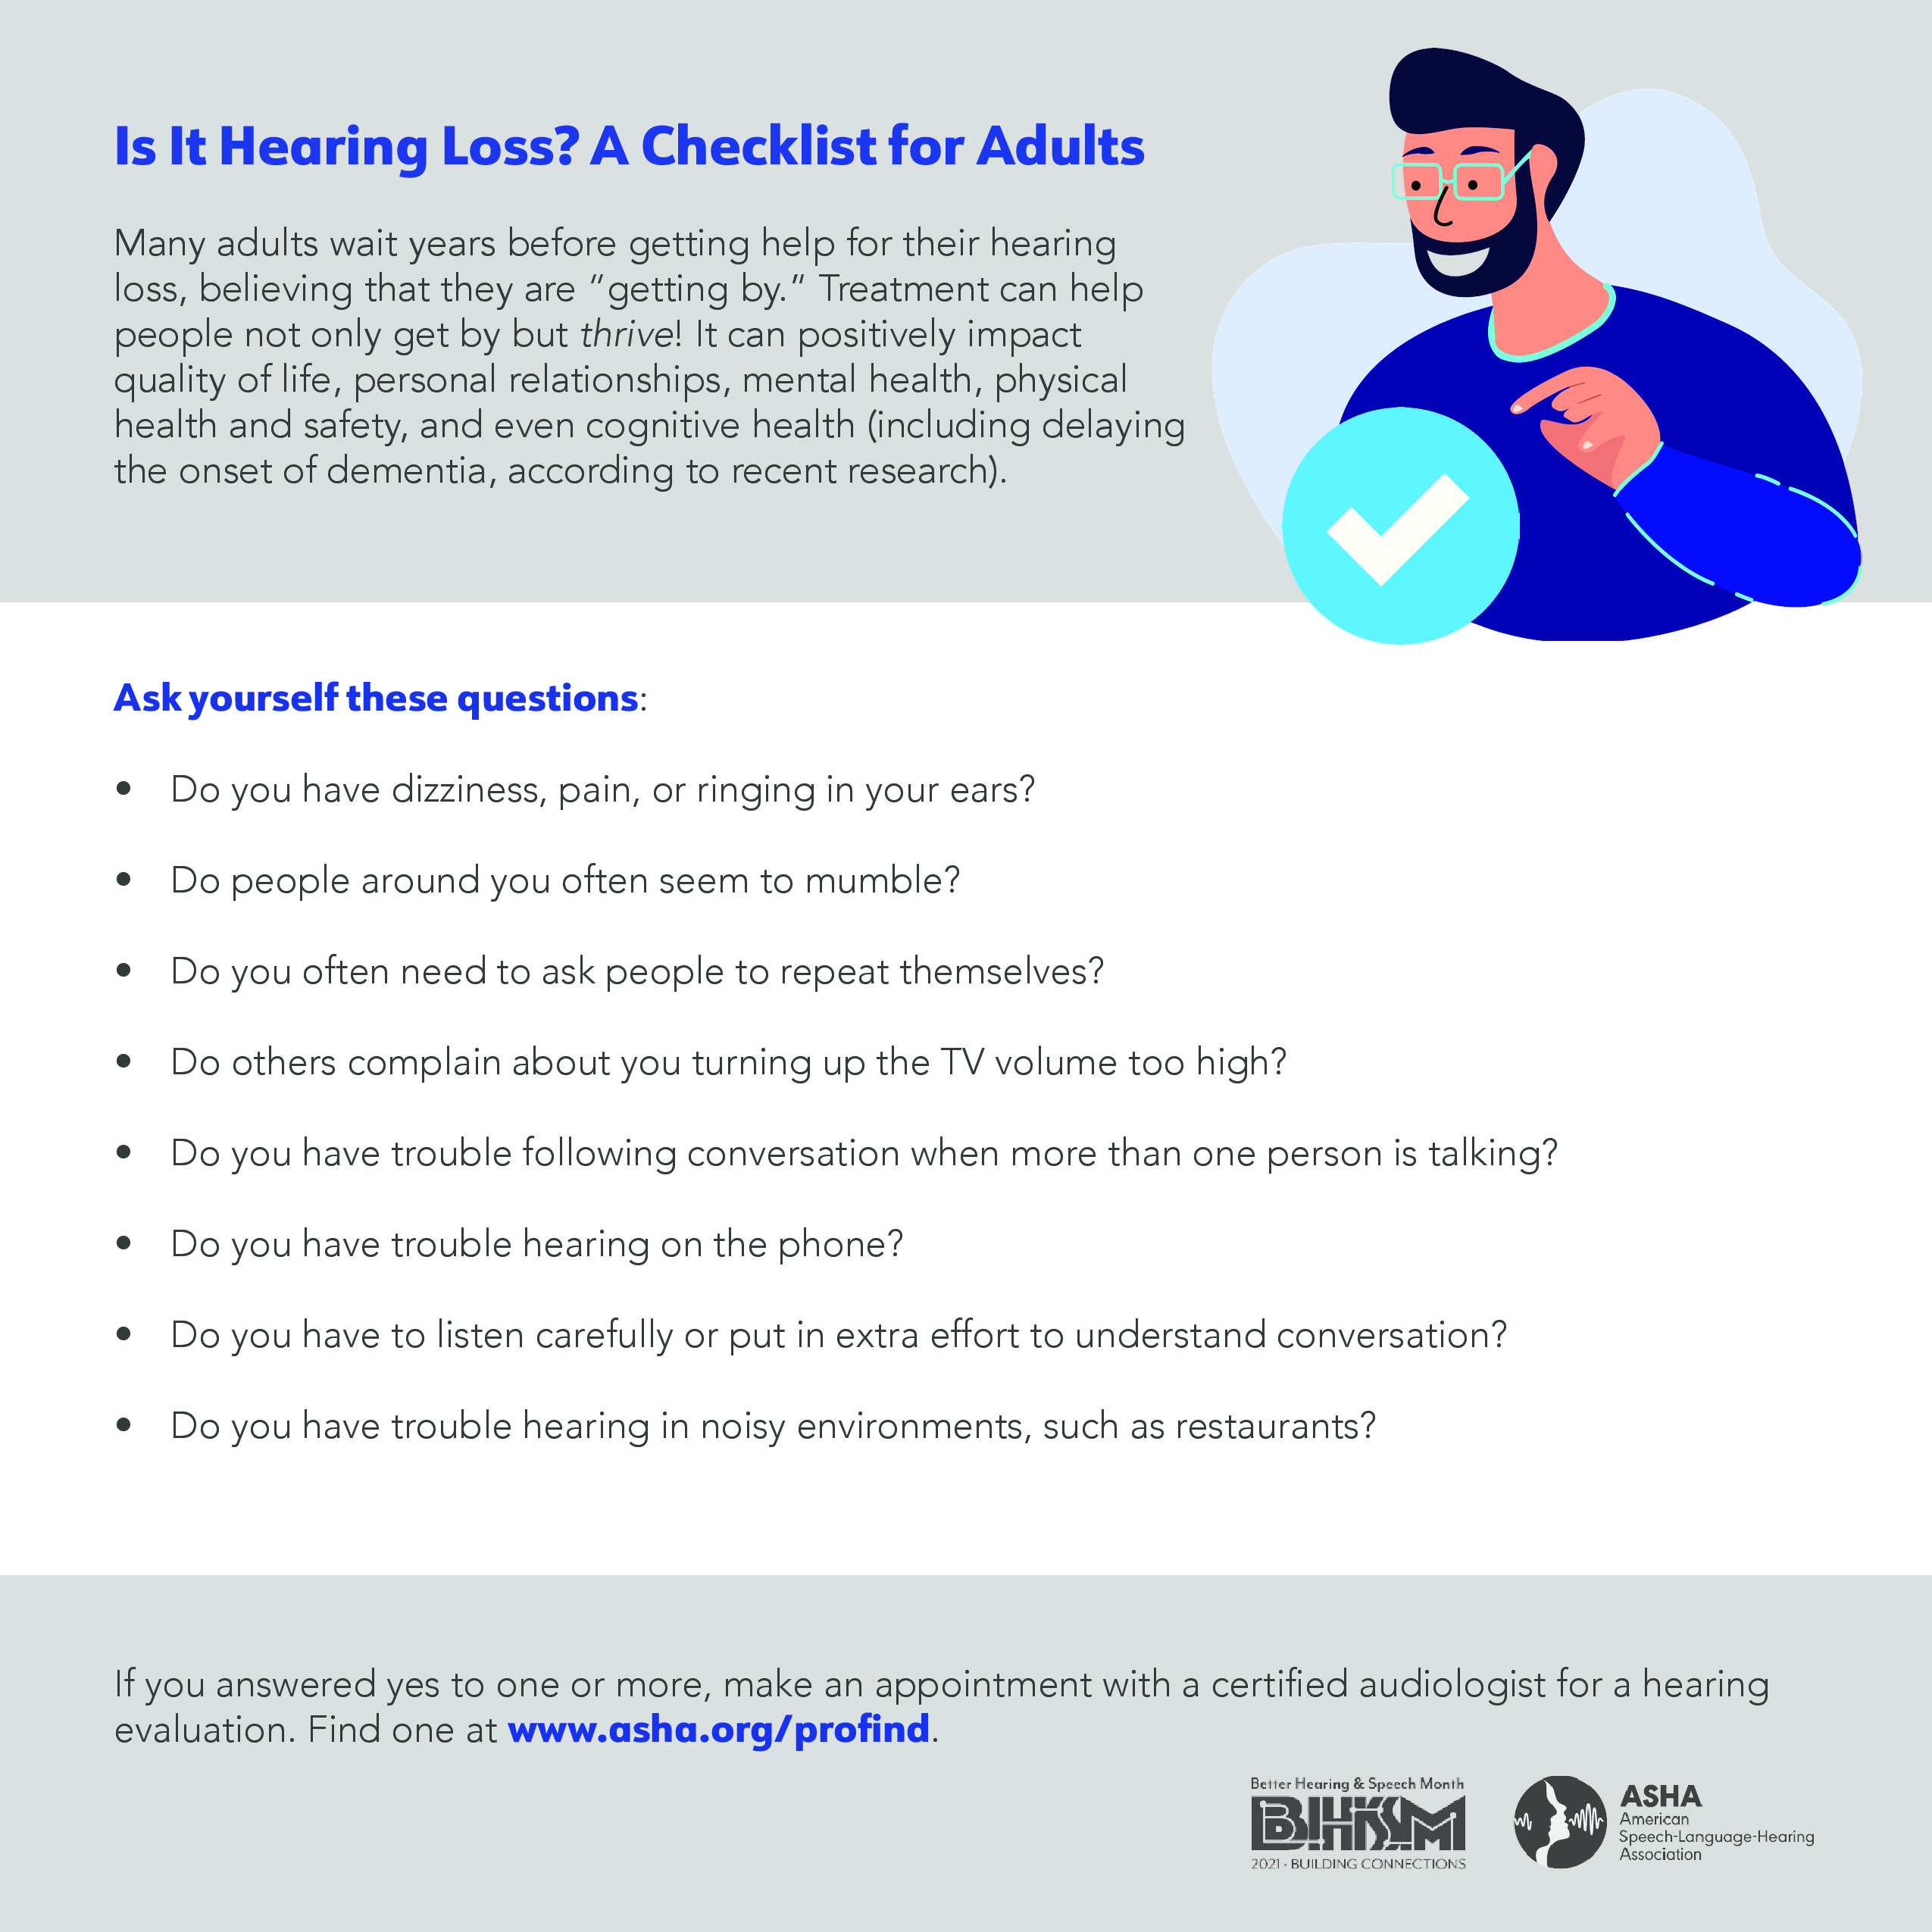 PDFHearingLossChecklist 1619621074210 1579626286 page 0